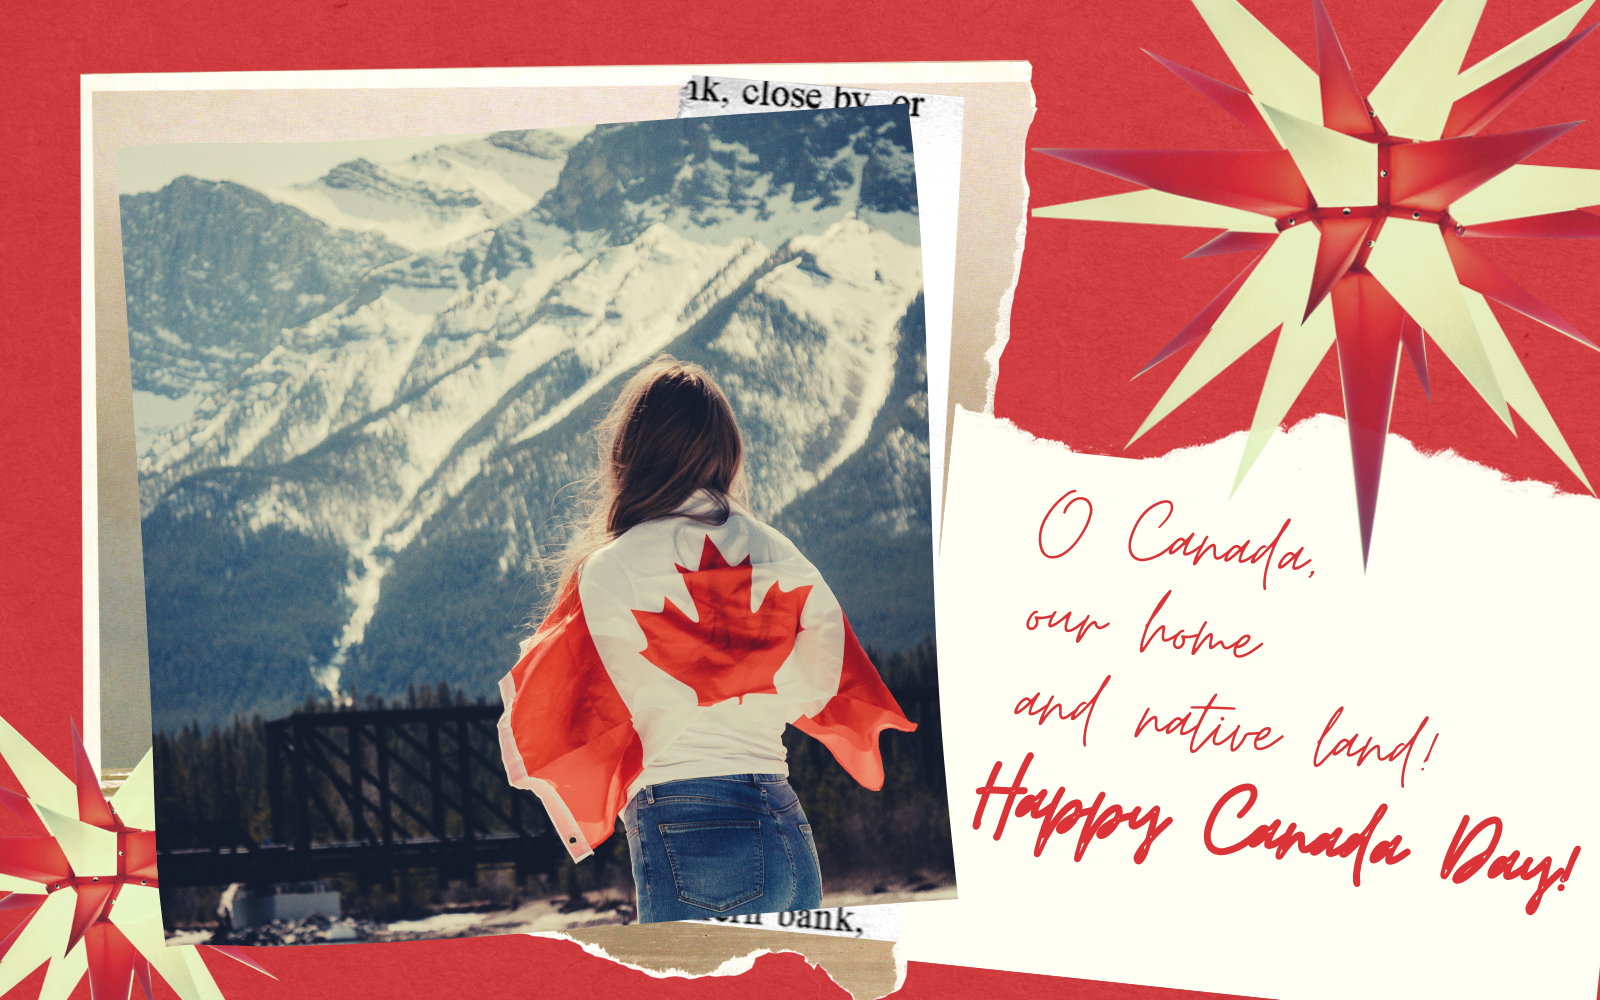 THE CANADIAN FLAG - HAPPY CANADA DAY!